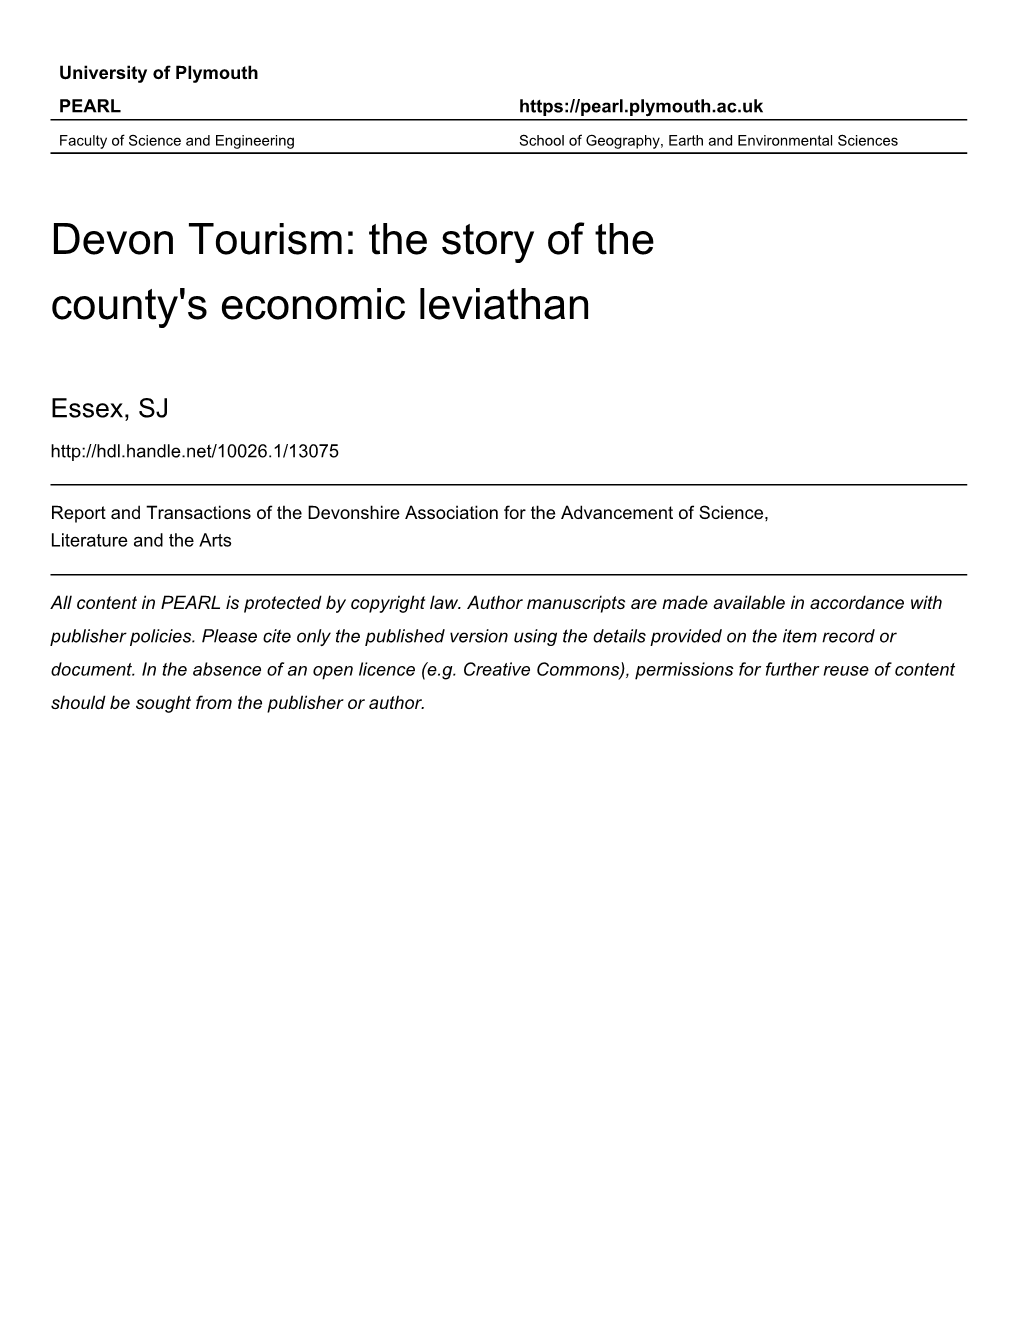 Devon Tourism: the Story of the County's Economic Leviathan